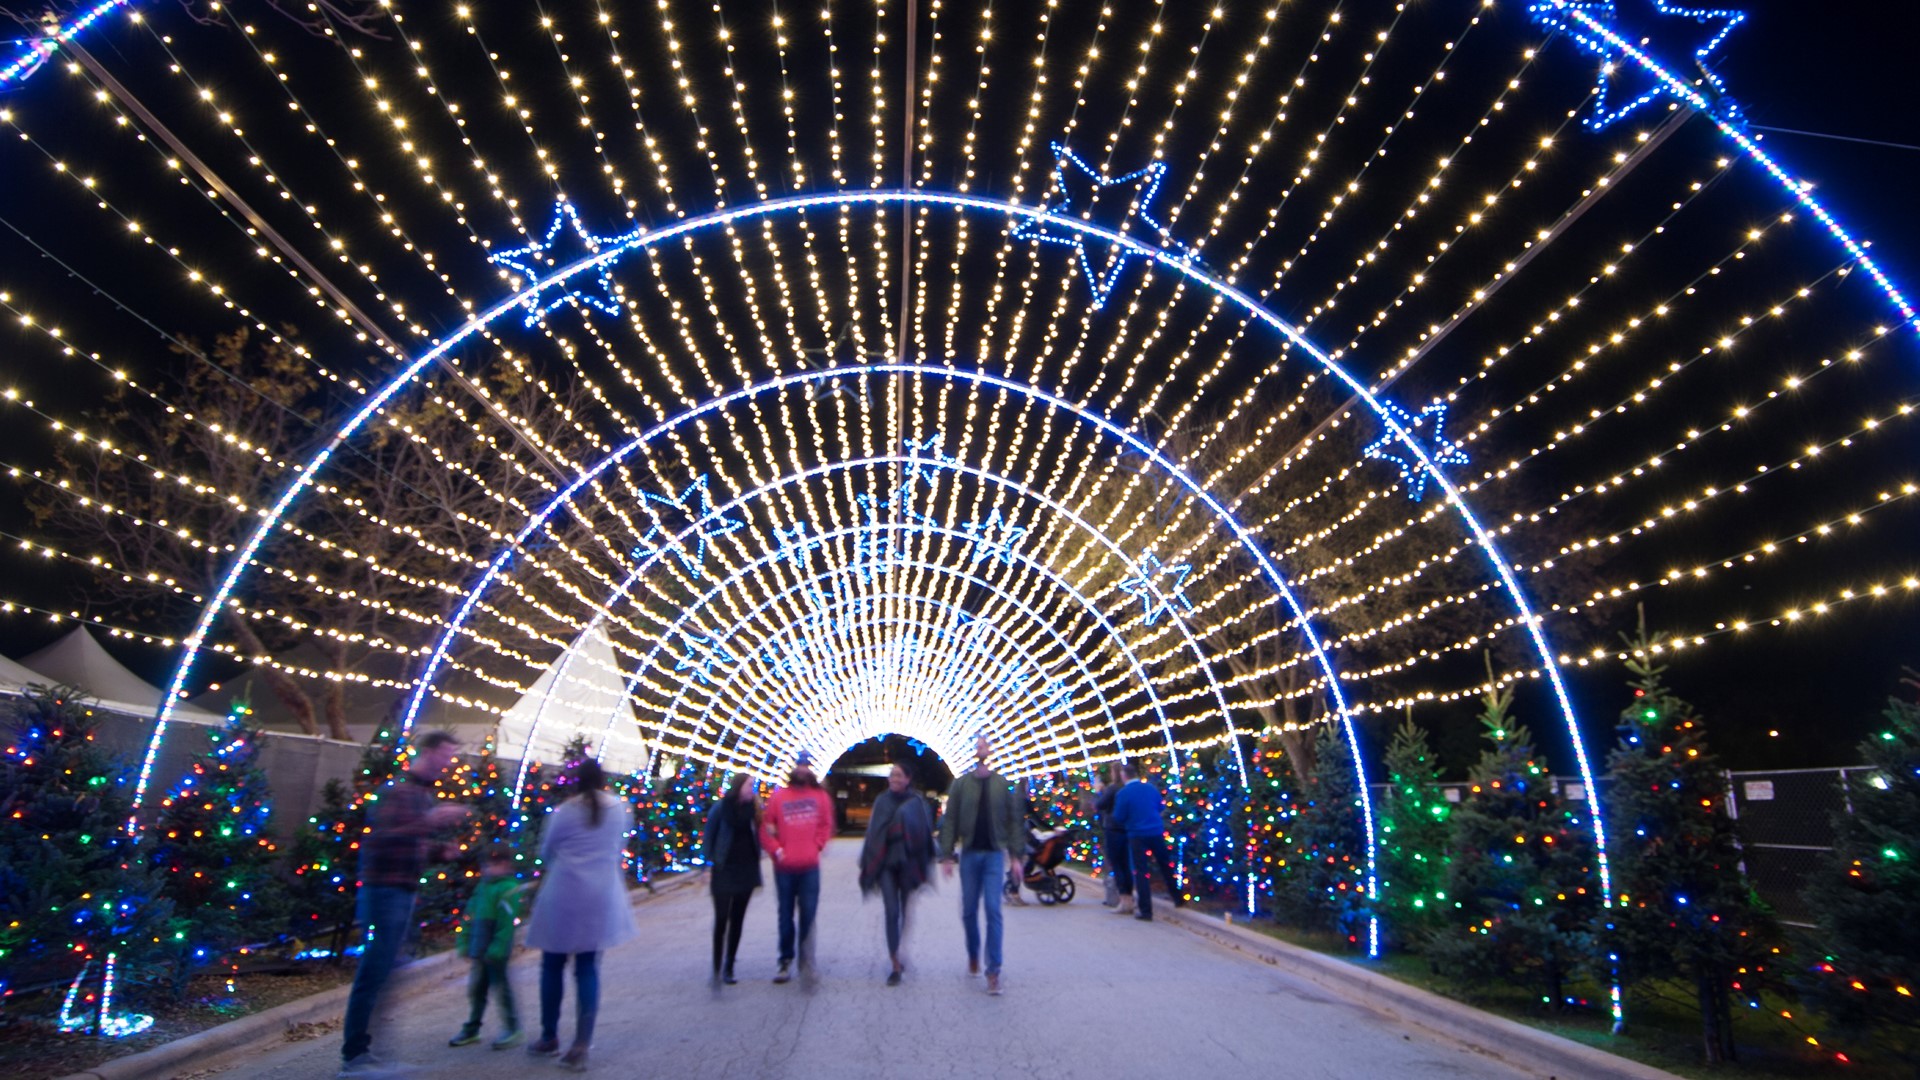 It's only May, but organizers have already announced the dates for the 60th annual Austin Trail of Lights.